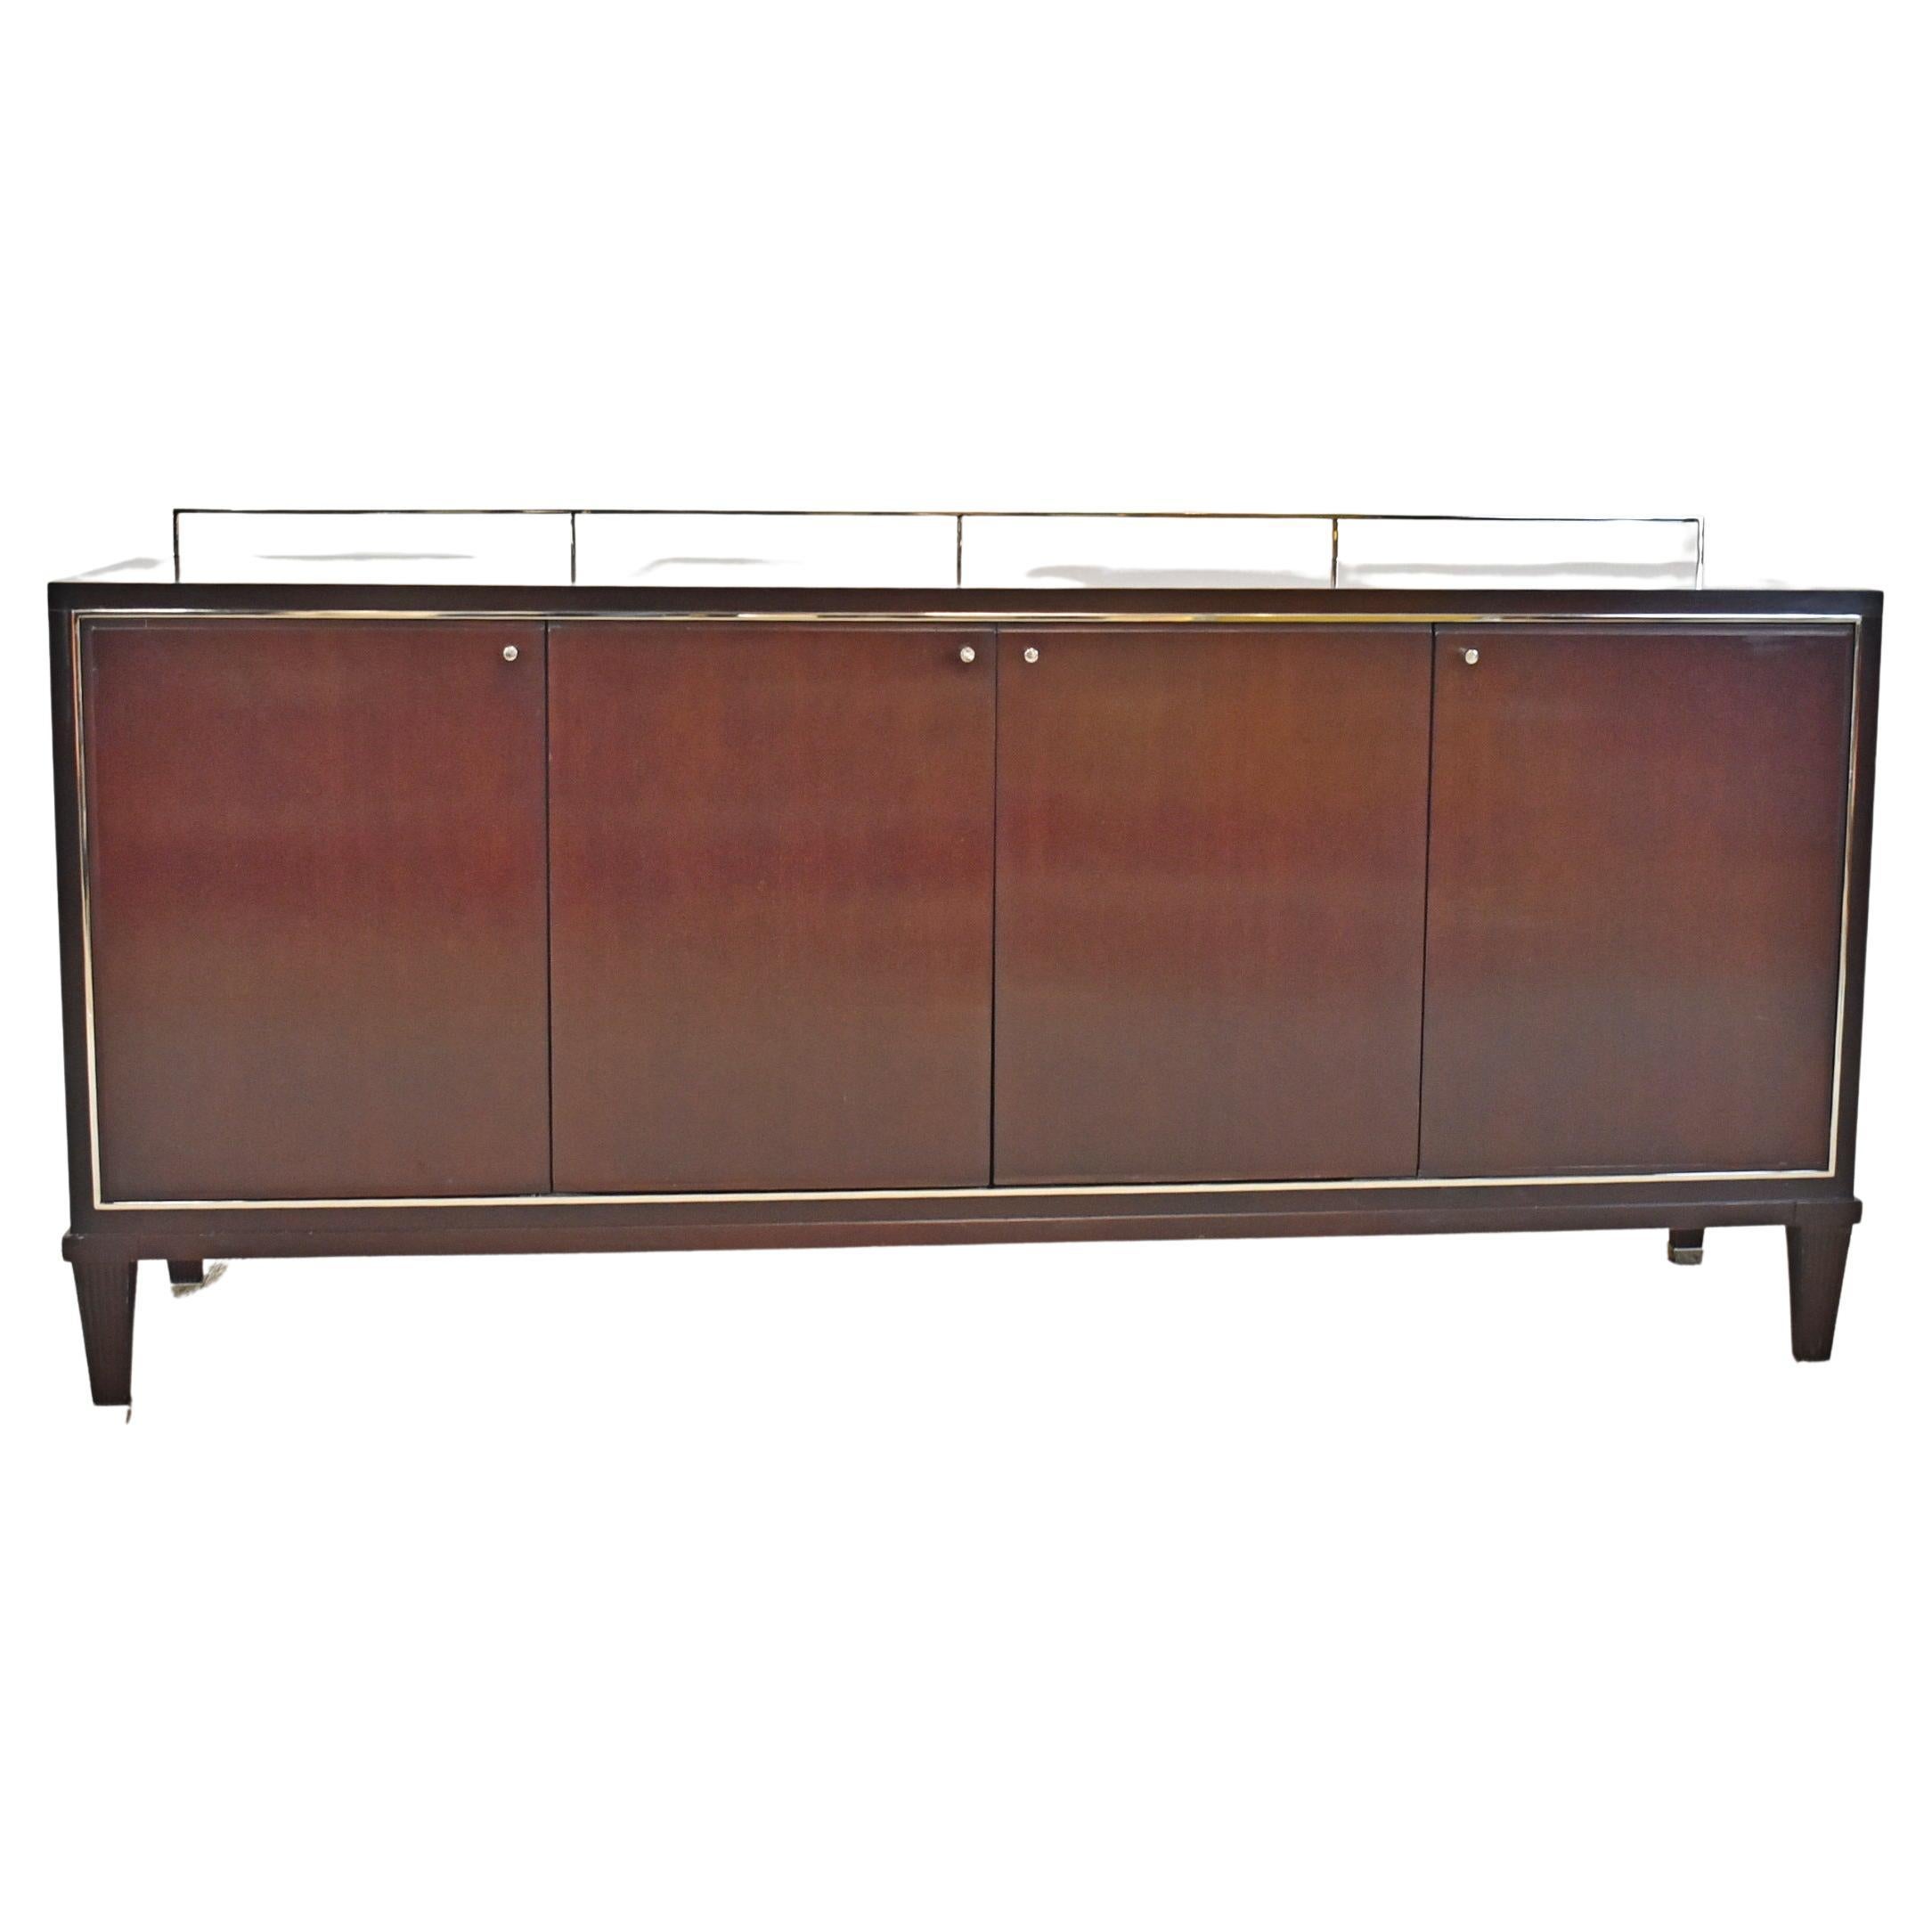 Barbara Barry Collection for Baker Furniture a 4 Door Mahogany Credenza